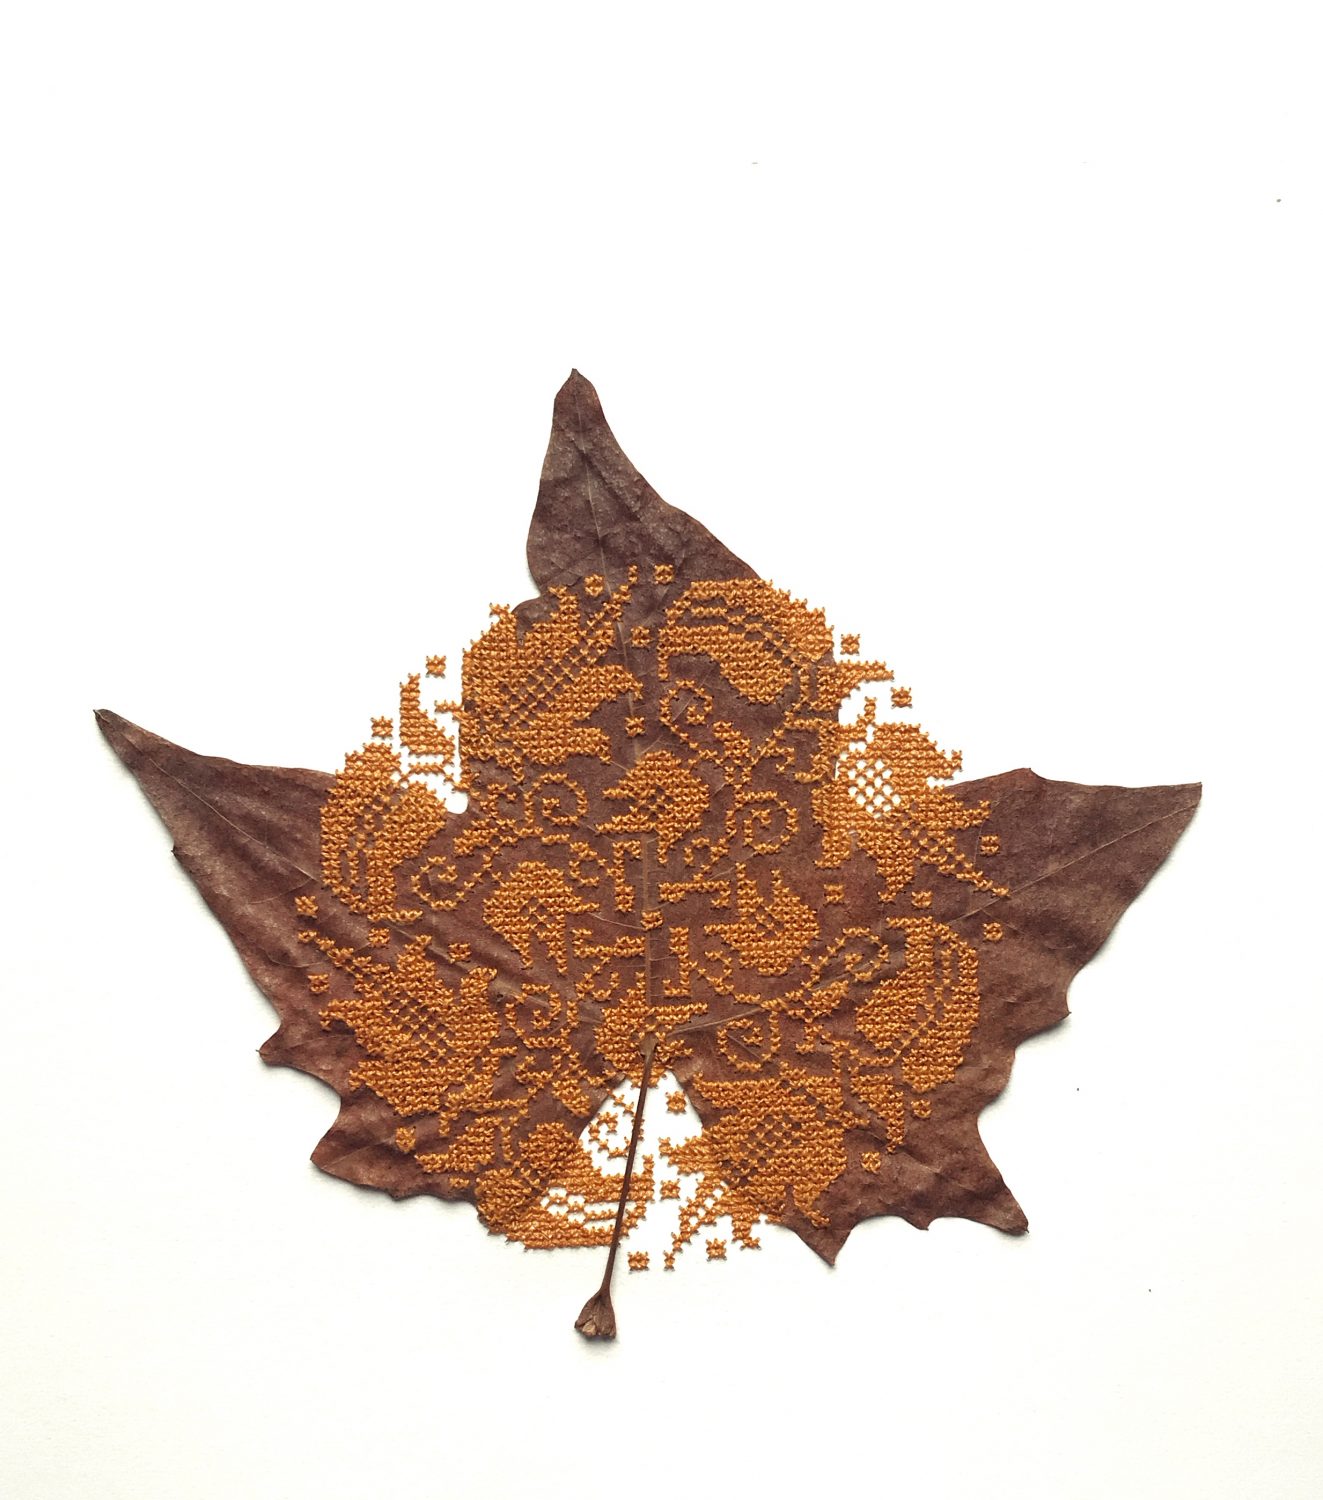 Golden brown cross-stitch, stitched into dried leaves